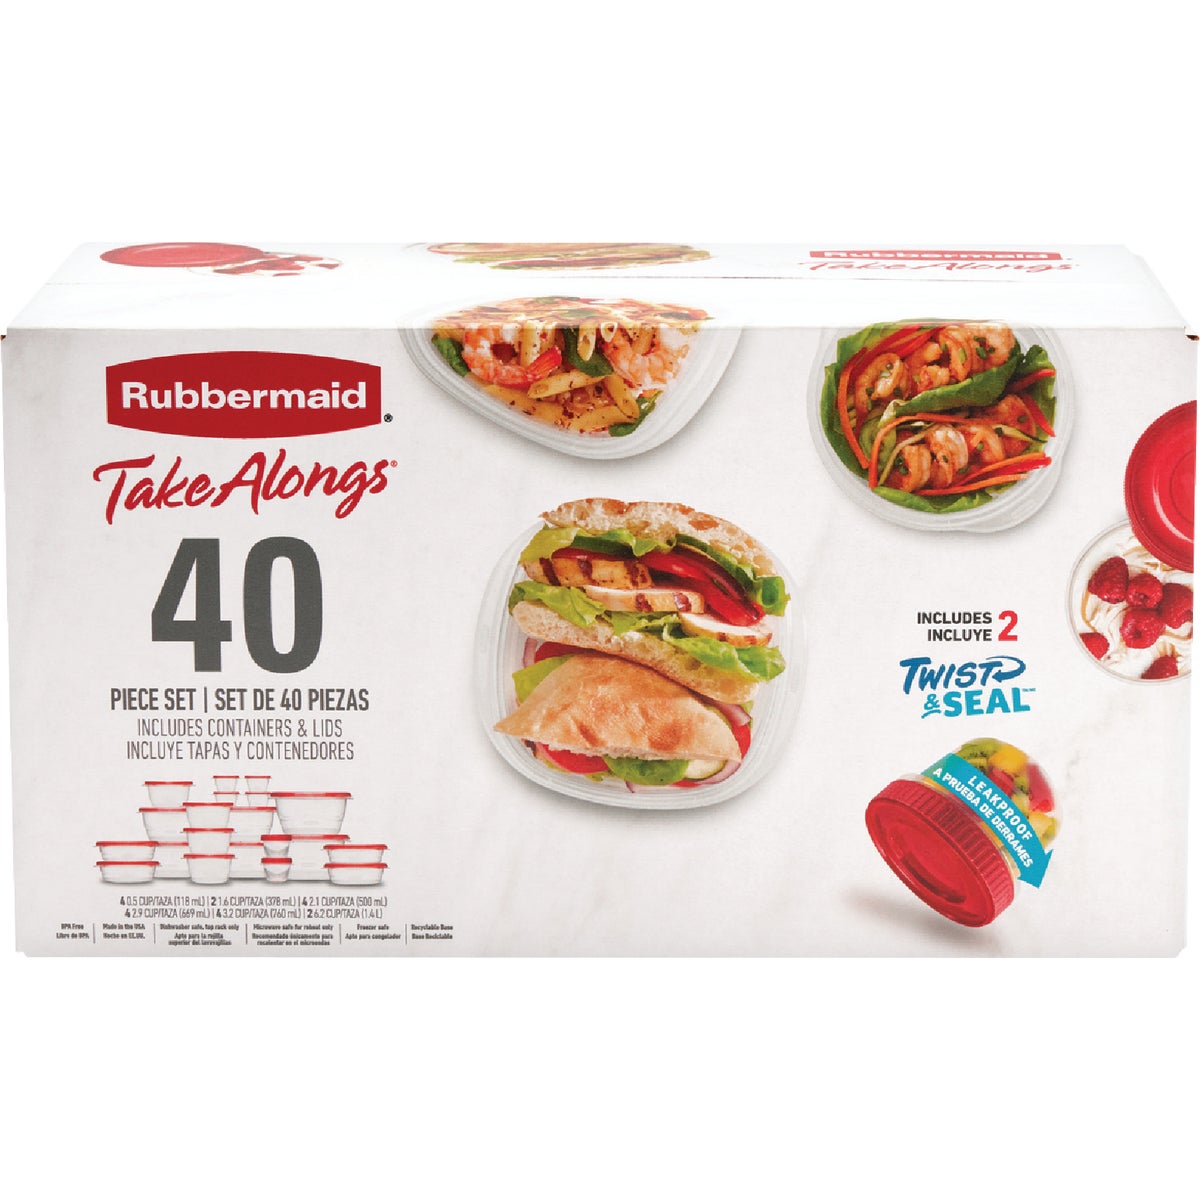 Rubbermaid Take Alongs Ruby Red Food Storage Container Set (40-Piece)